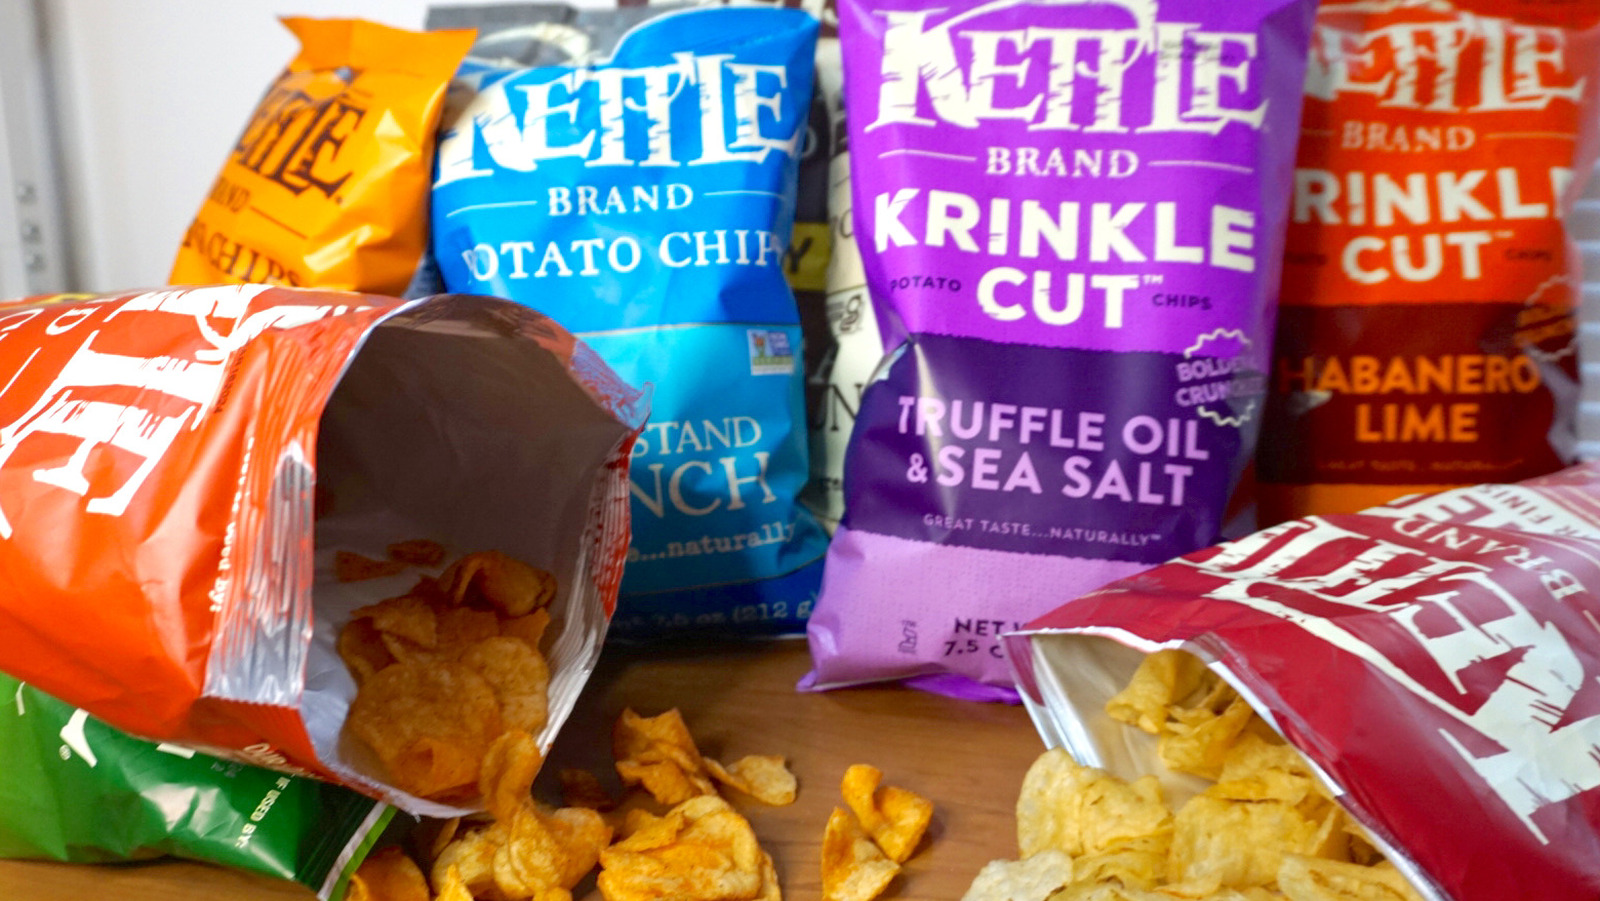 https://www.tastingtable.com/img/gallery/popular-kettle-potato-chip-flavors-ranked-from-worst-to-best/l-intro-1702492424.jpg